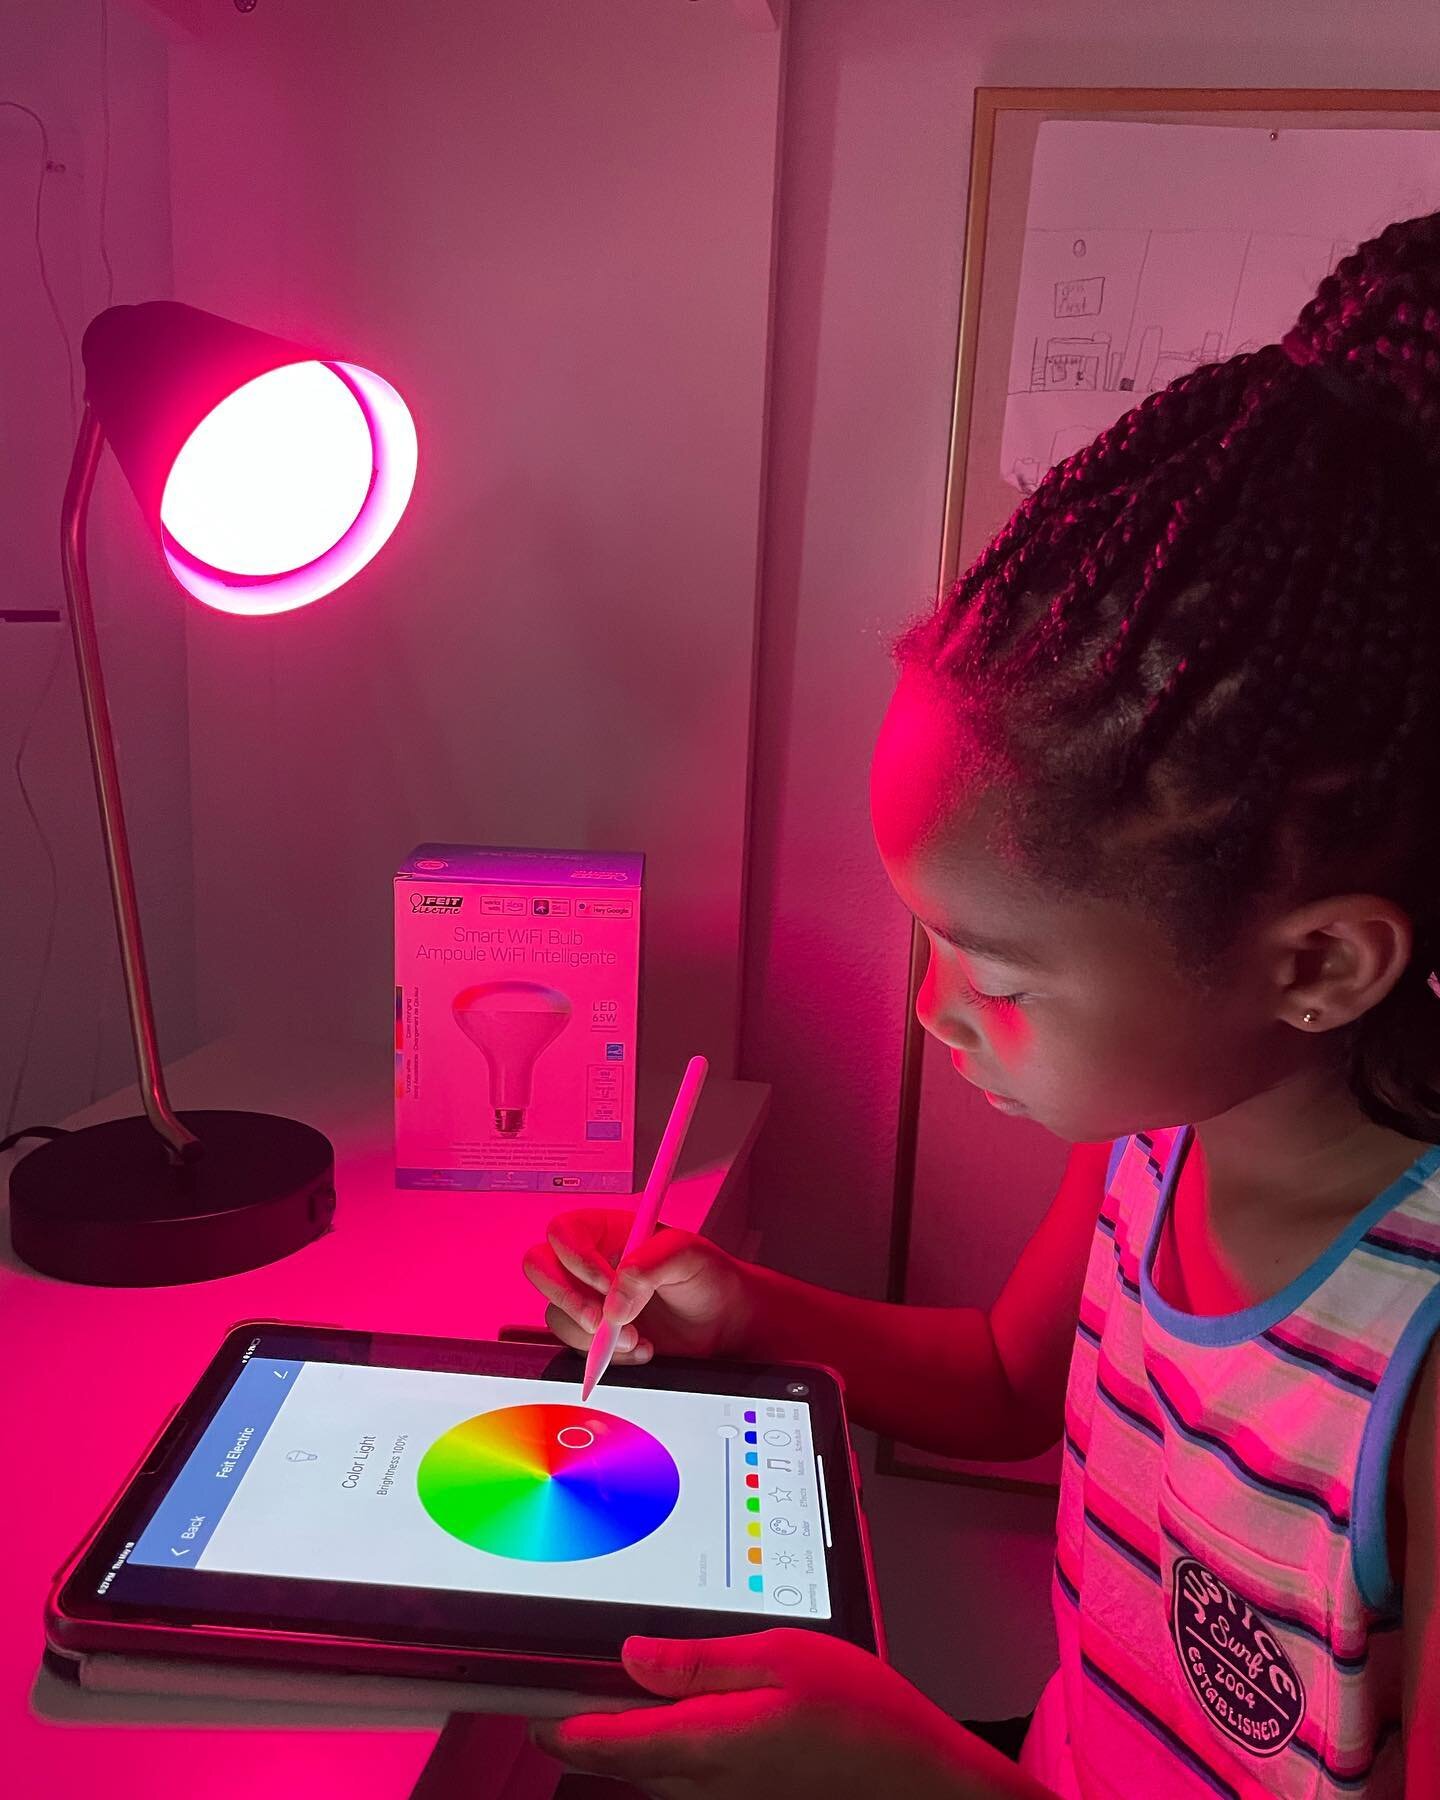 As a mom, I always strive to be the &quot;cool mom&quot; especially as my 8-year-old is getting older and taking note. #ad So when I discovered the 65W Replacement BR30 RGBW Alexa Google Smart Bulb, I knew it was the perfect upgrade to her room. With